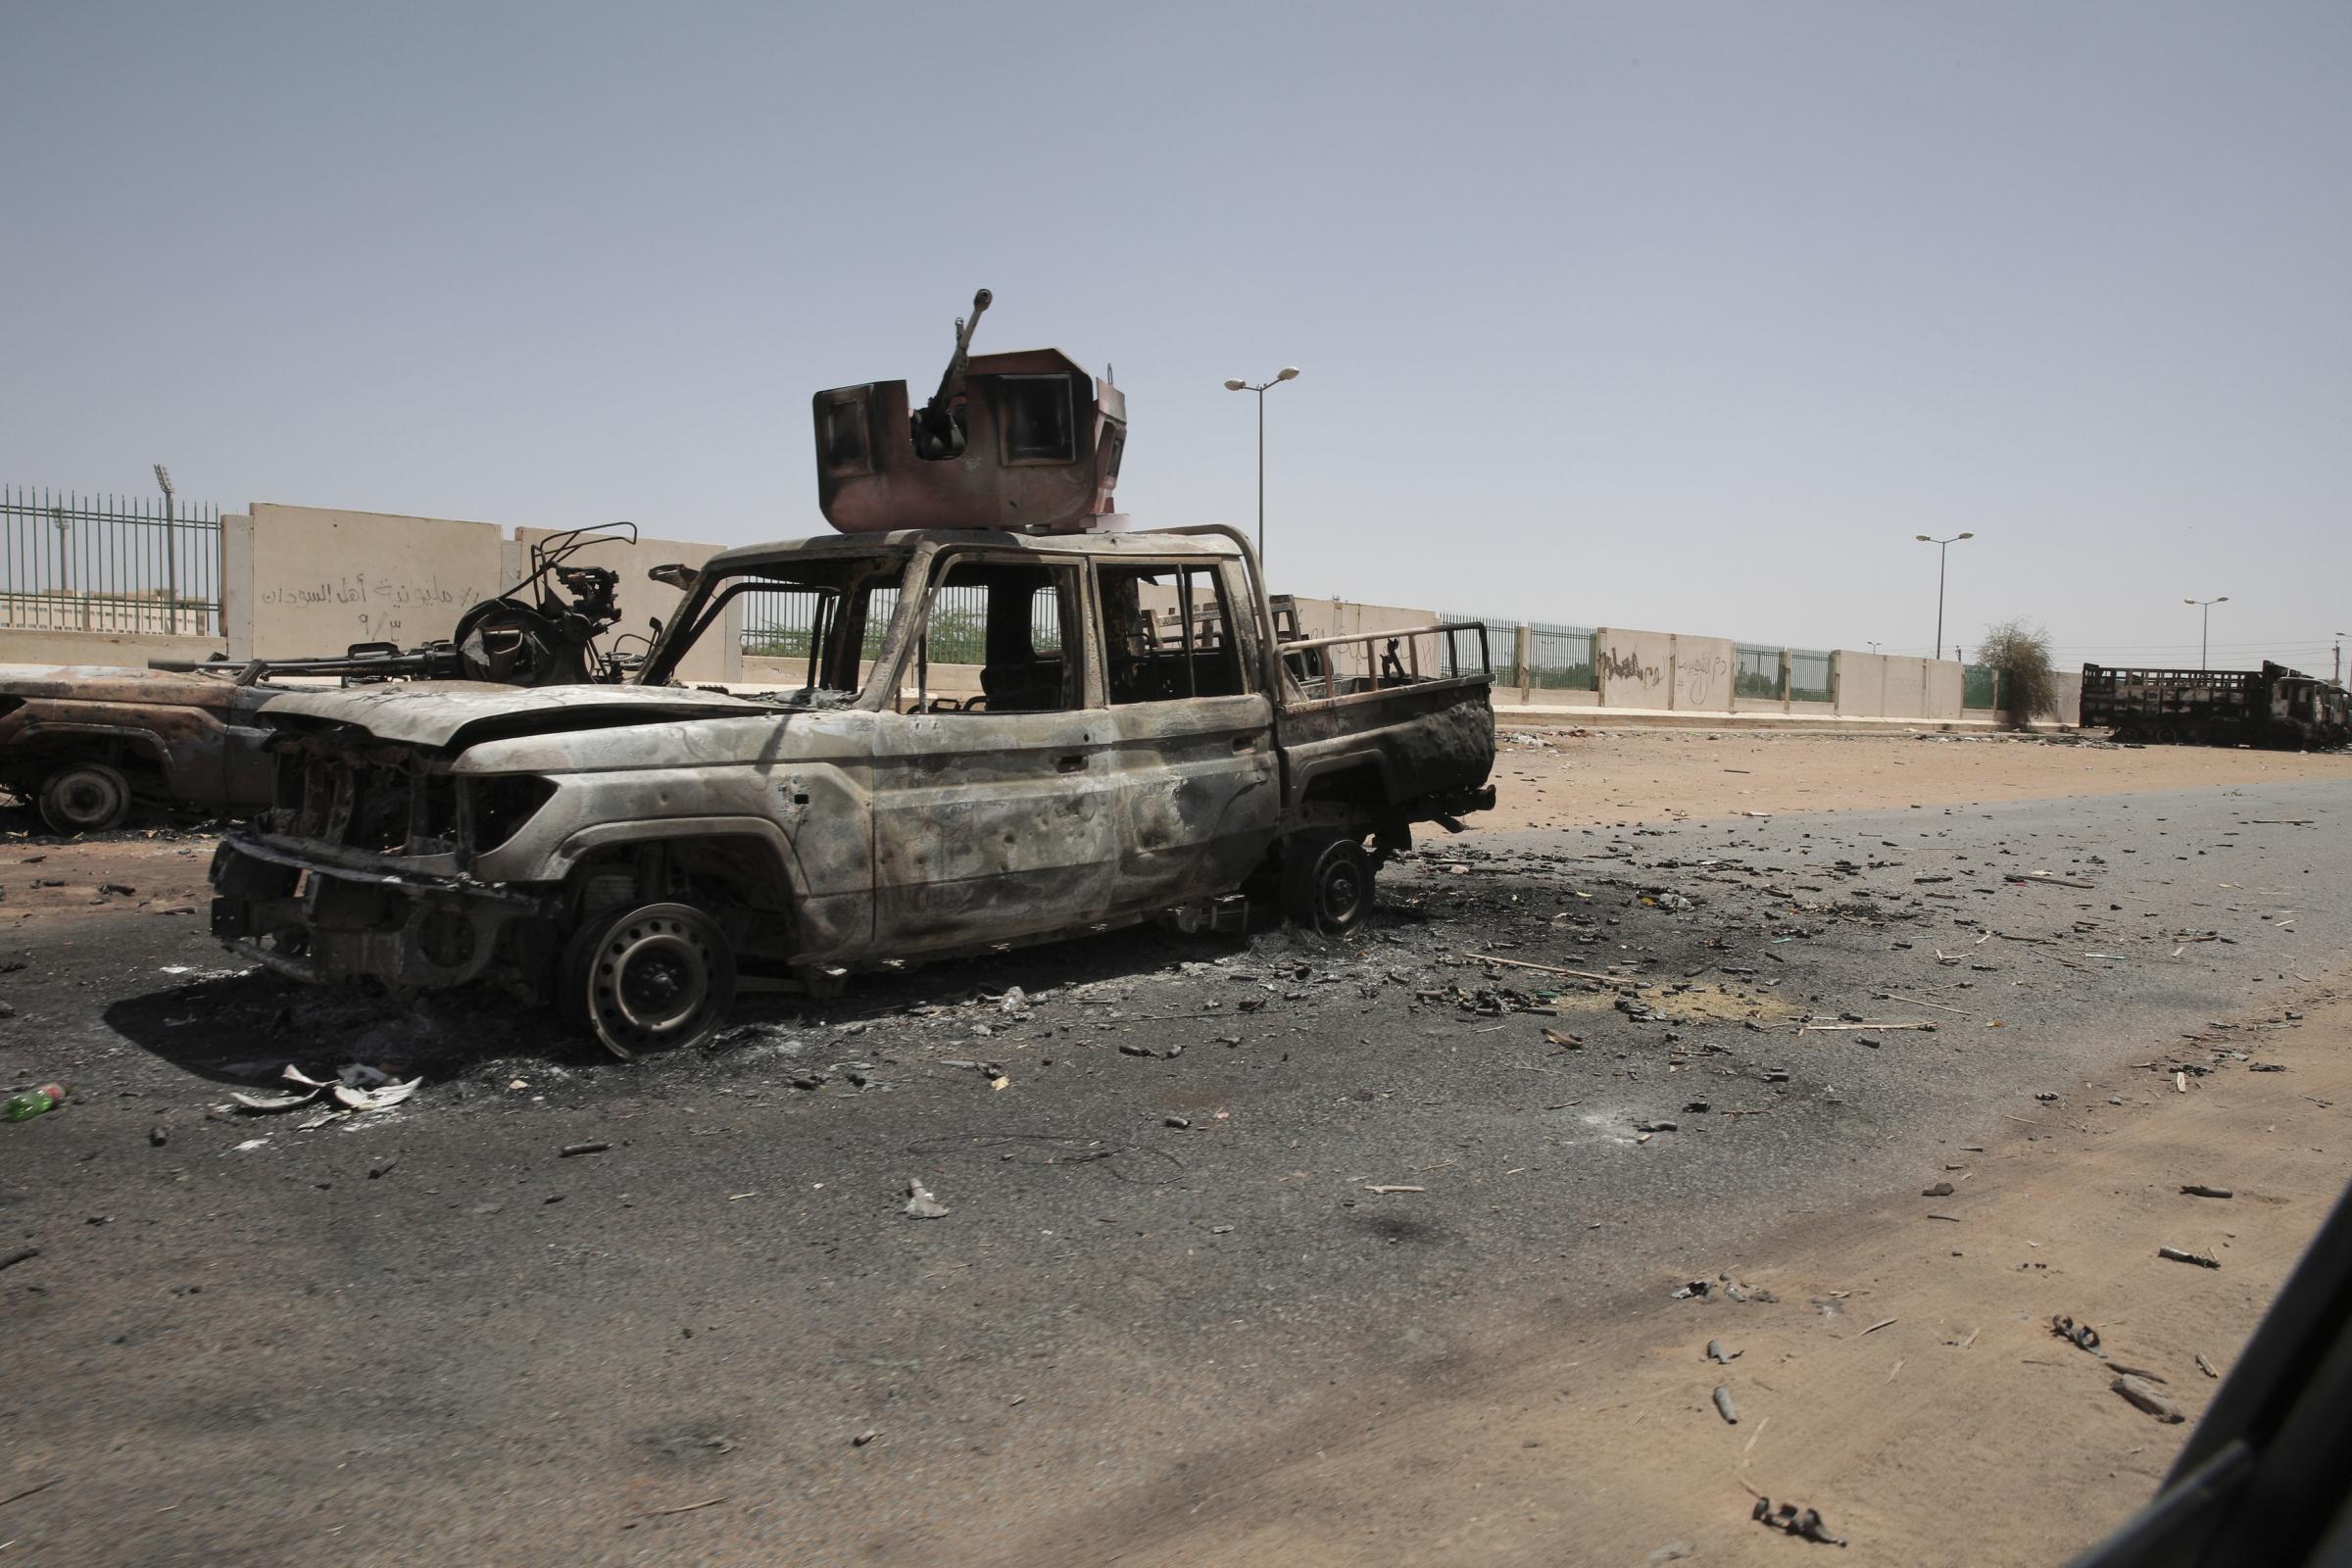 Destroyed military vehicles are seen in southern in Khartoum, Sudan, Thursday, April 20, 2023. The latest attempt at a cease-fire between the rival Sudanese forces faltered as gunfire rattled the capital of Khartoum. Through the night and into Thursday